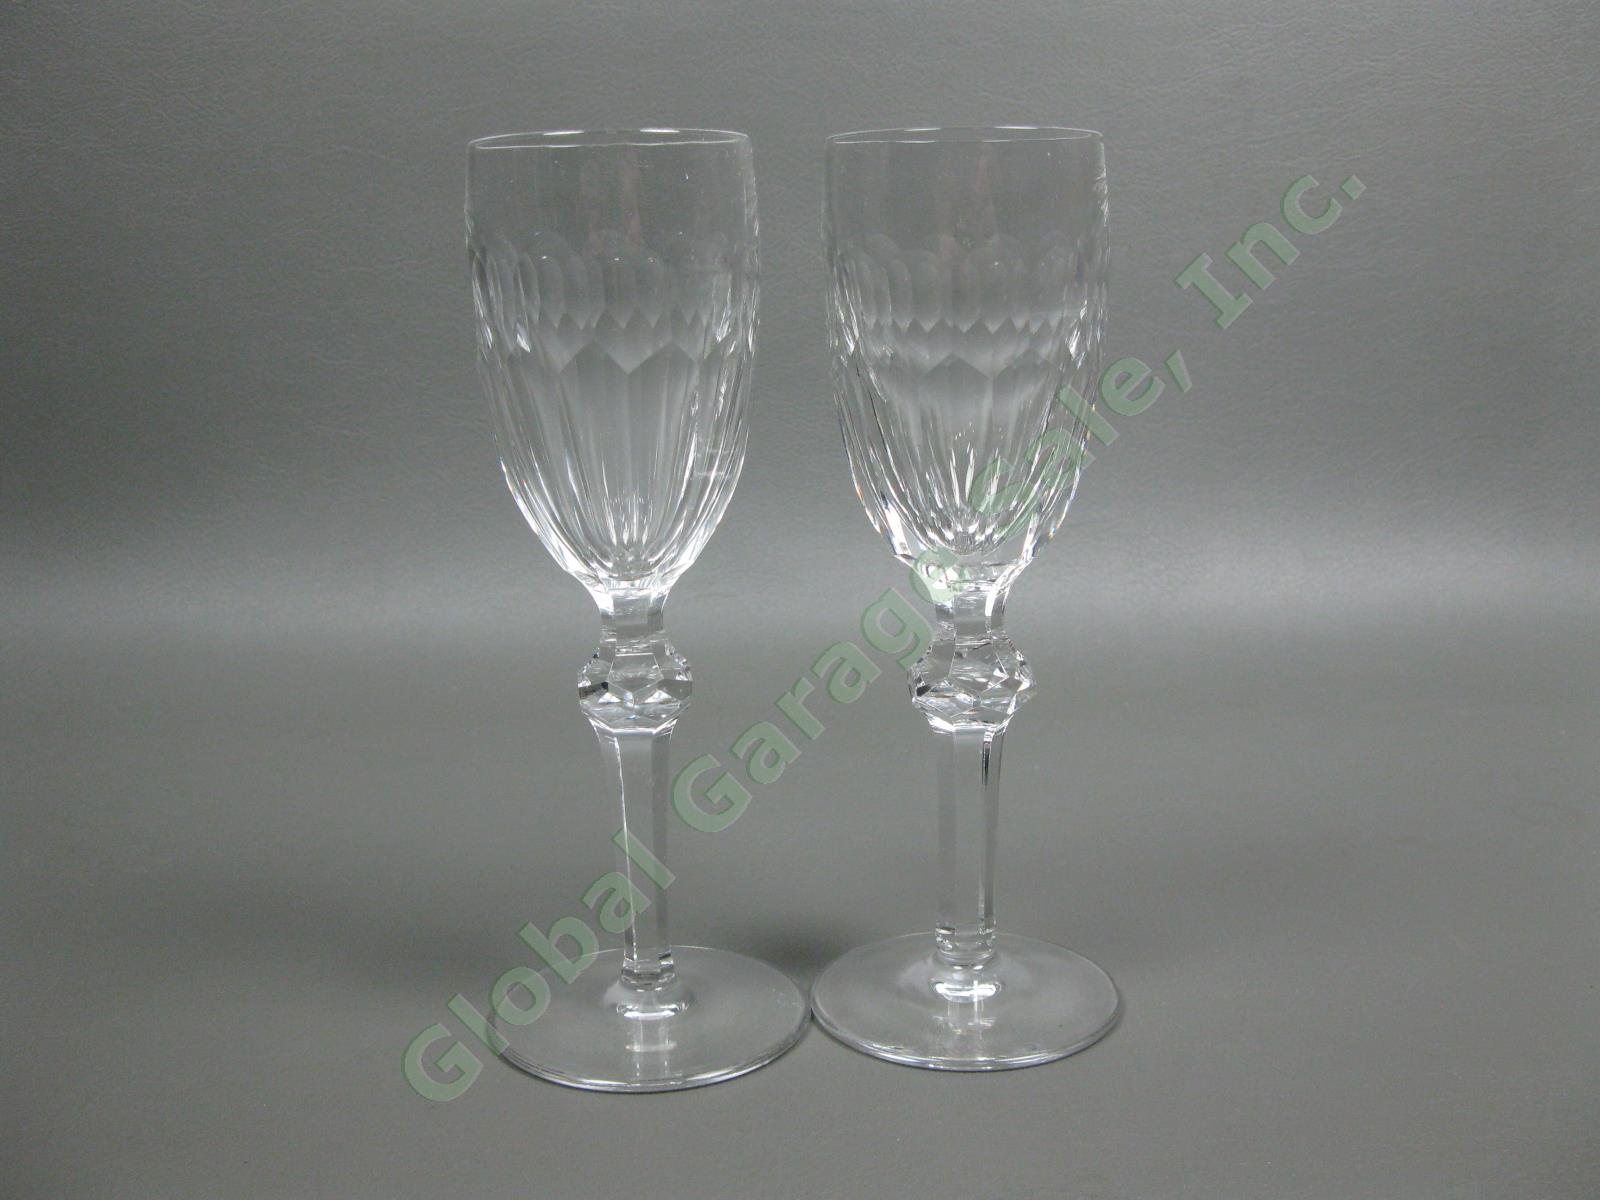 6 Waterford Crystal Curraghmore Sherry Wine Glasses Ireland Blown Cut Glass Set 3